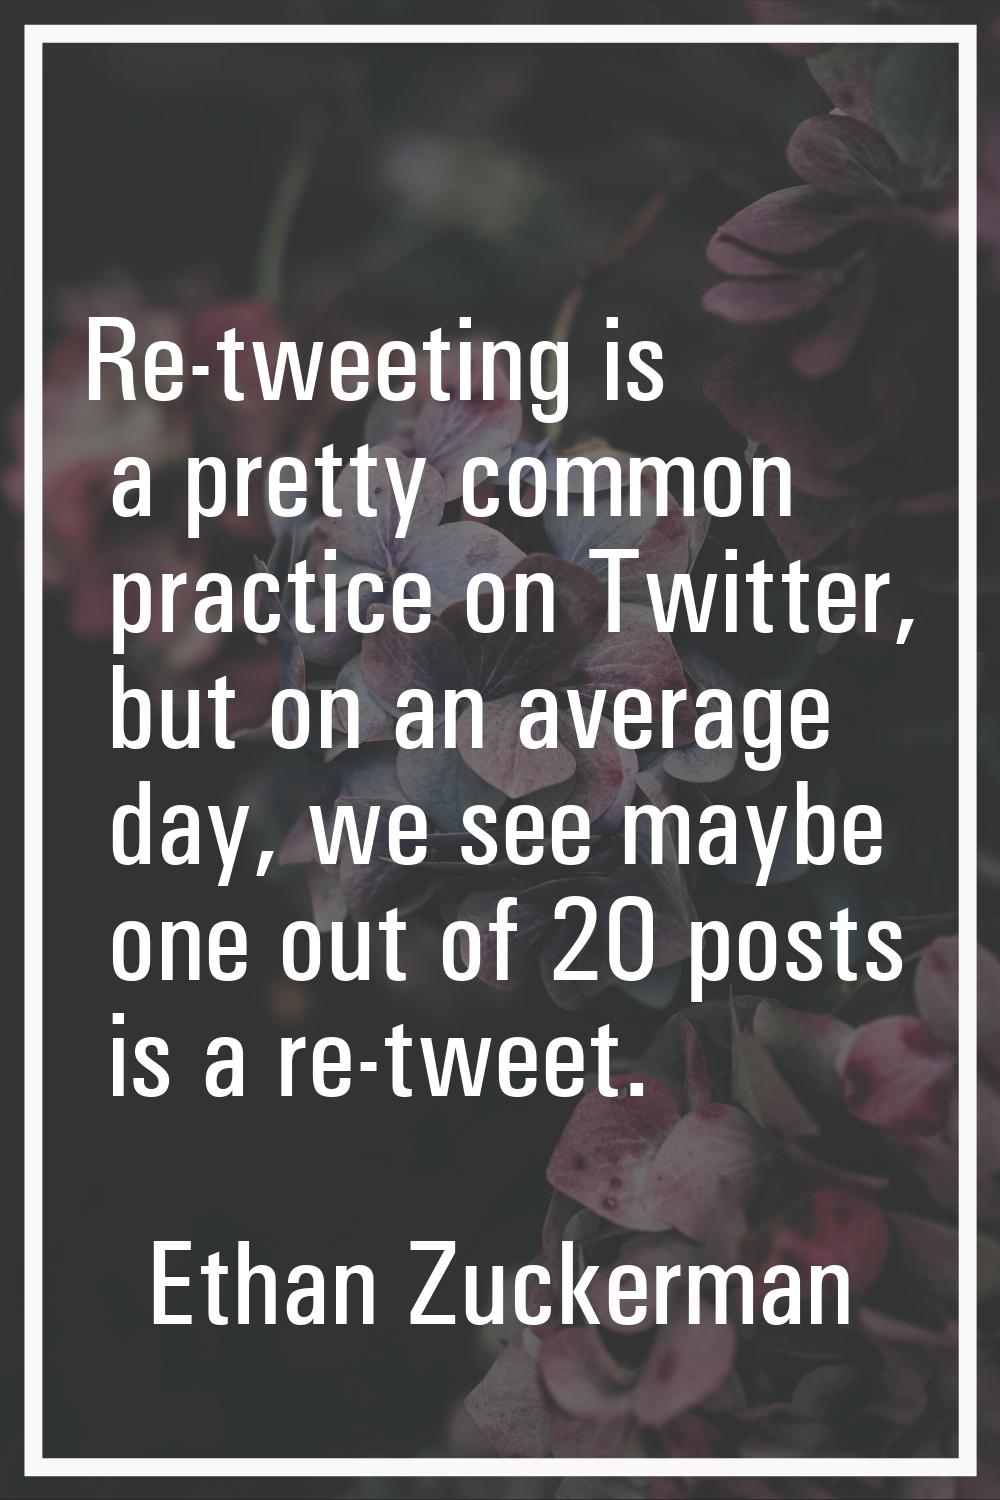 Re-tweeting is a pretty common practice on Twitter, but on an average day, we see maybe one out of 